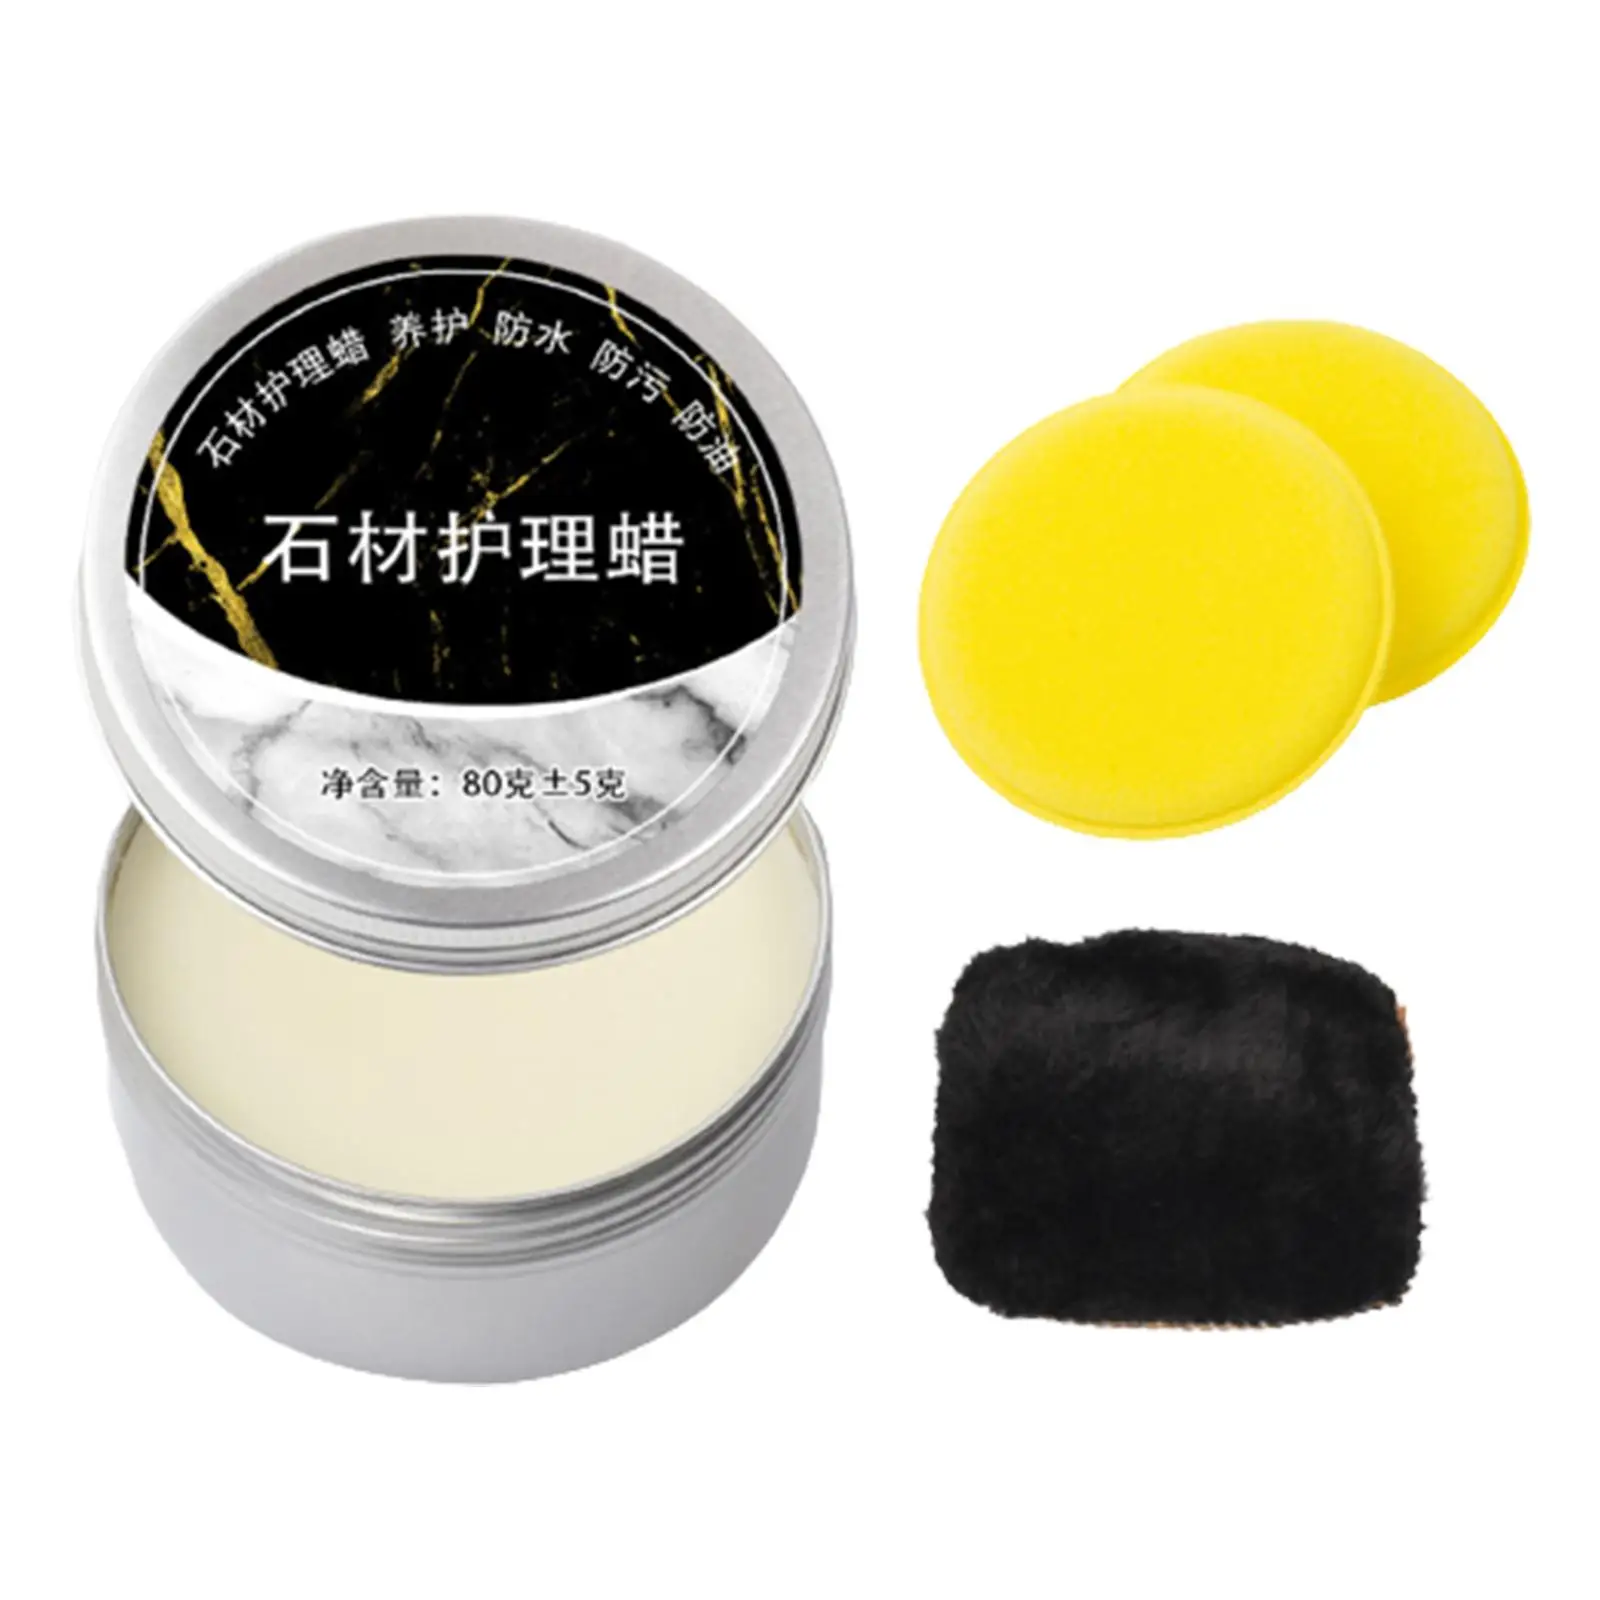 Wood Seasoning Beewax with Sponge Natural Beeswax Repair 80G Wood Furniture Beeswax Polish for Tables Marble Floors Cabinets